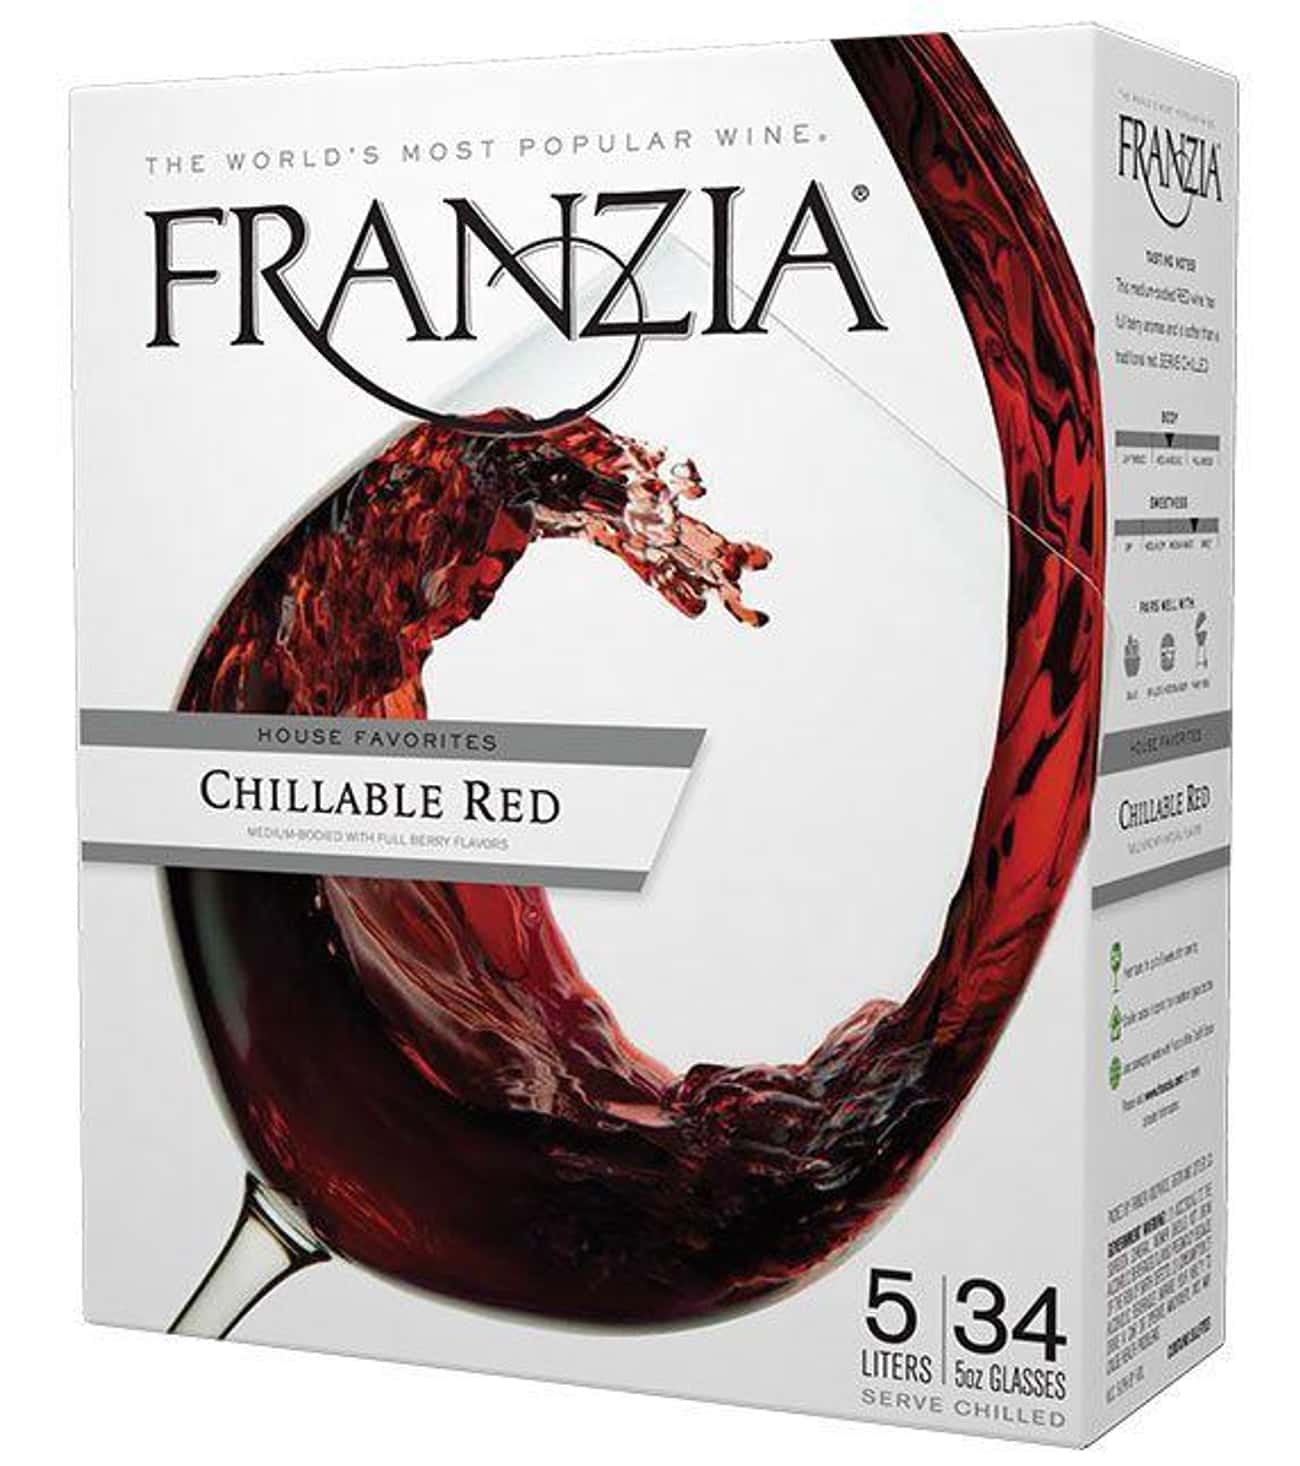 The Very Best Flavors of Franzia Boxed Wine